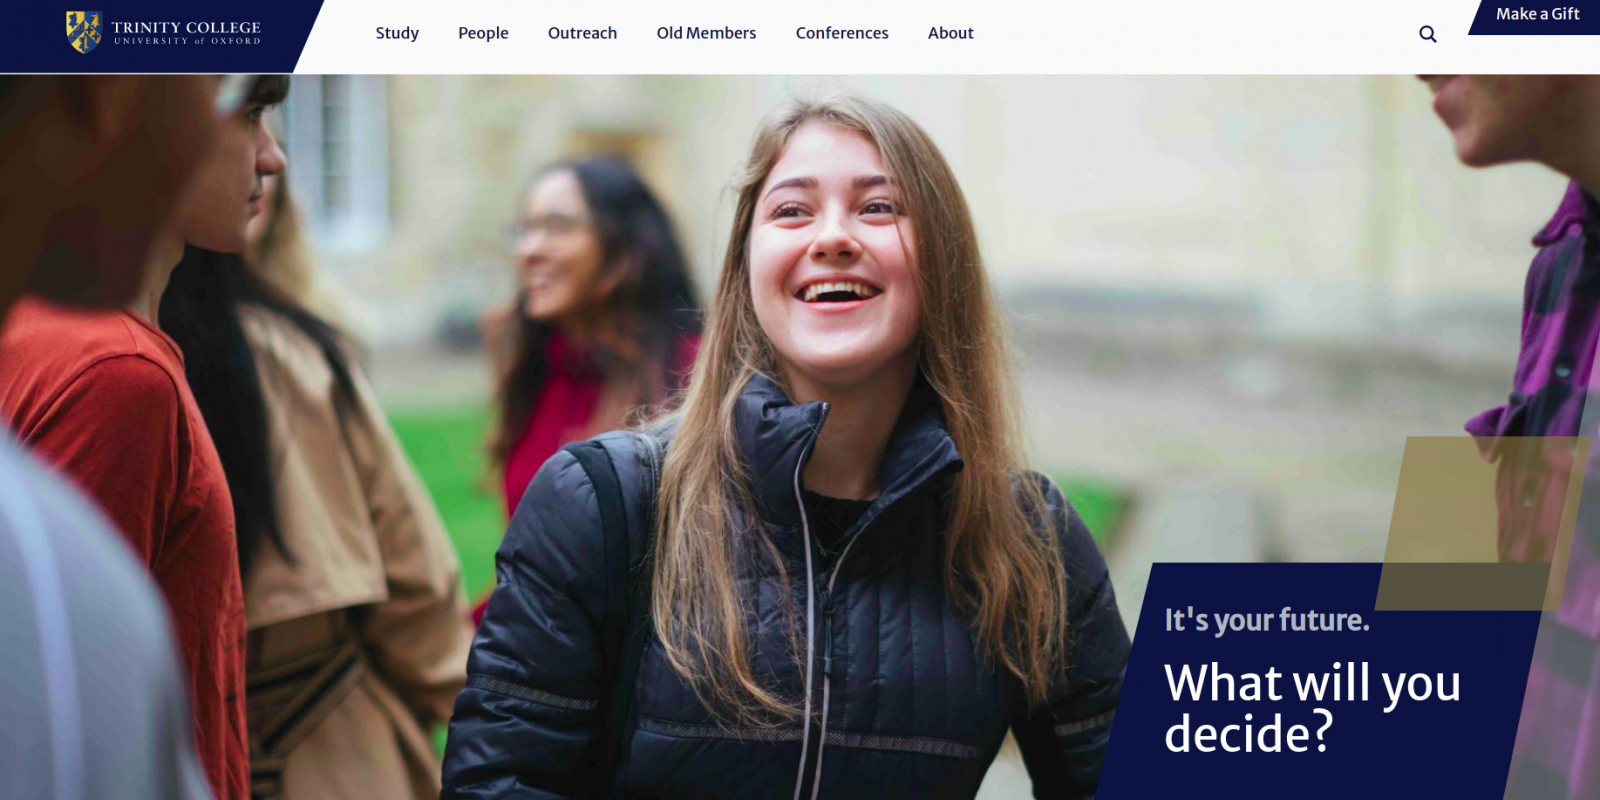 Trinity College - University of Oxford - website hompage